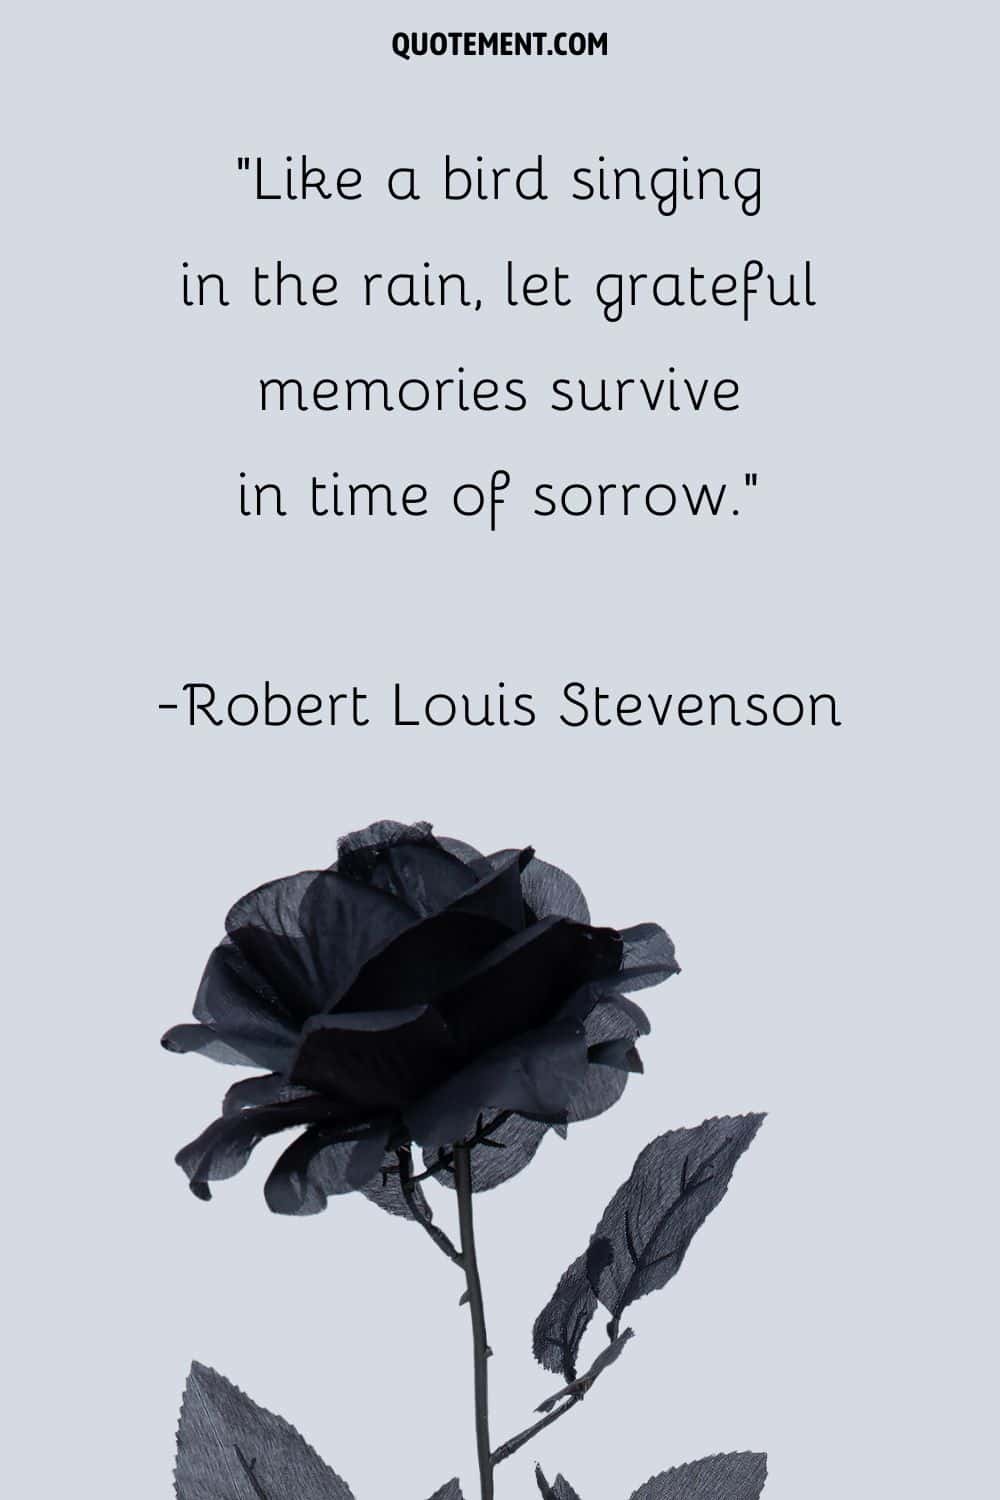 Like a bird singing in the rain, let grateful memories survive in time of sorrow.